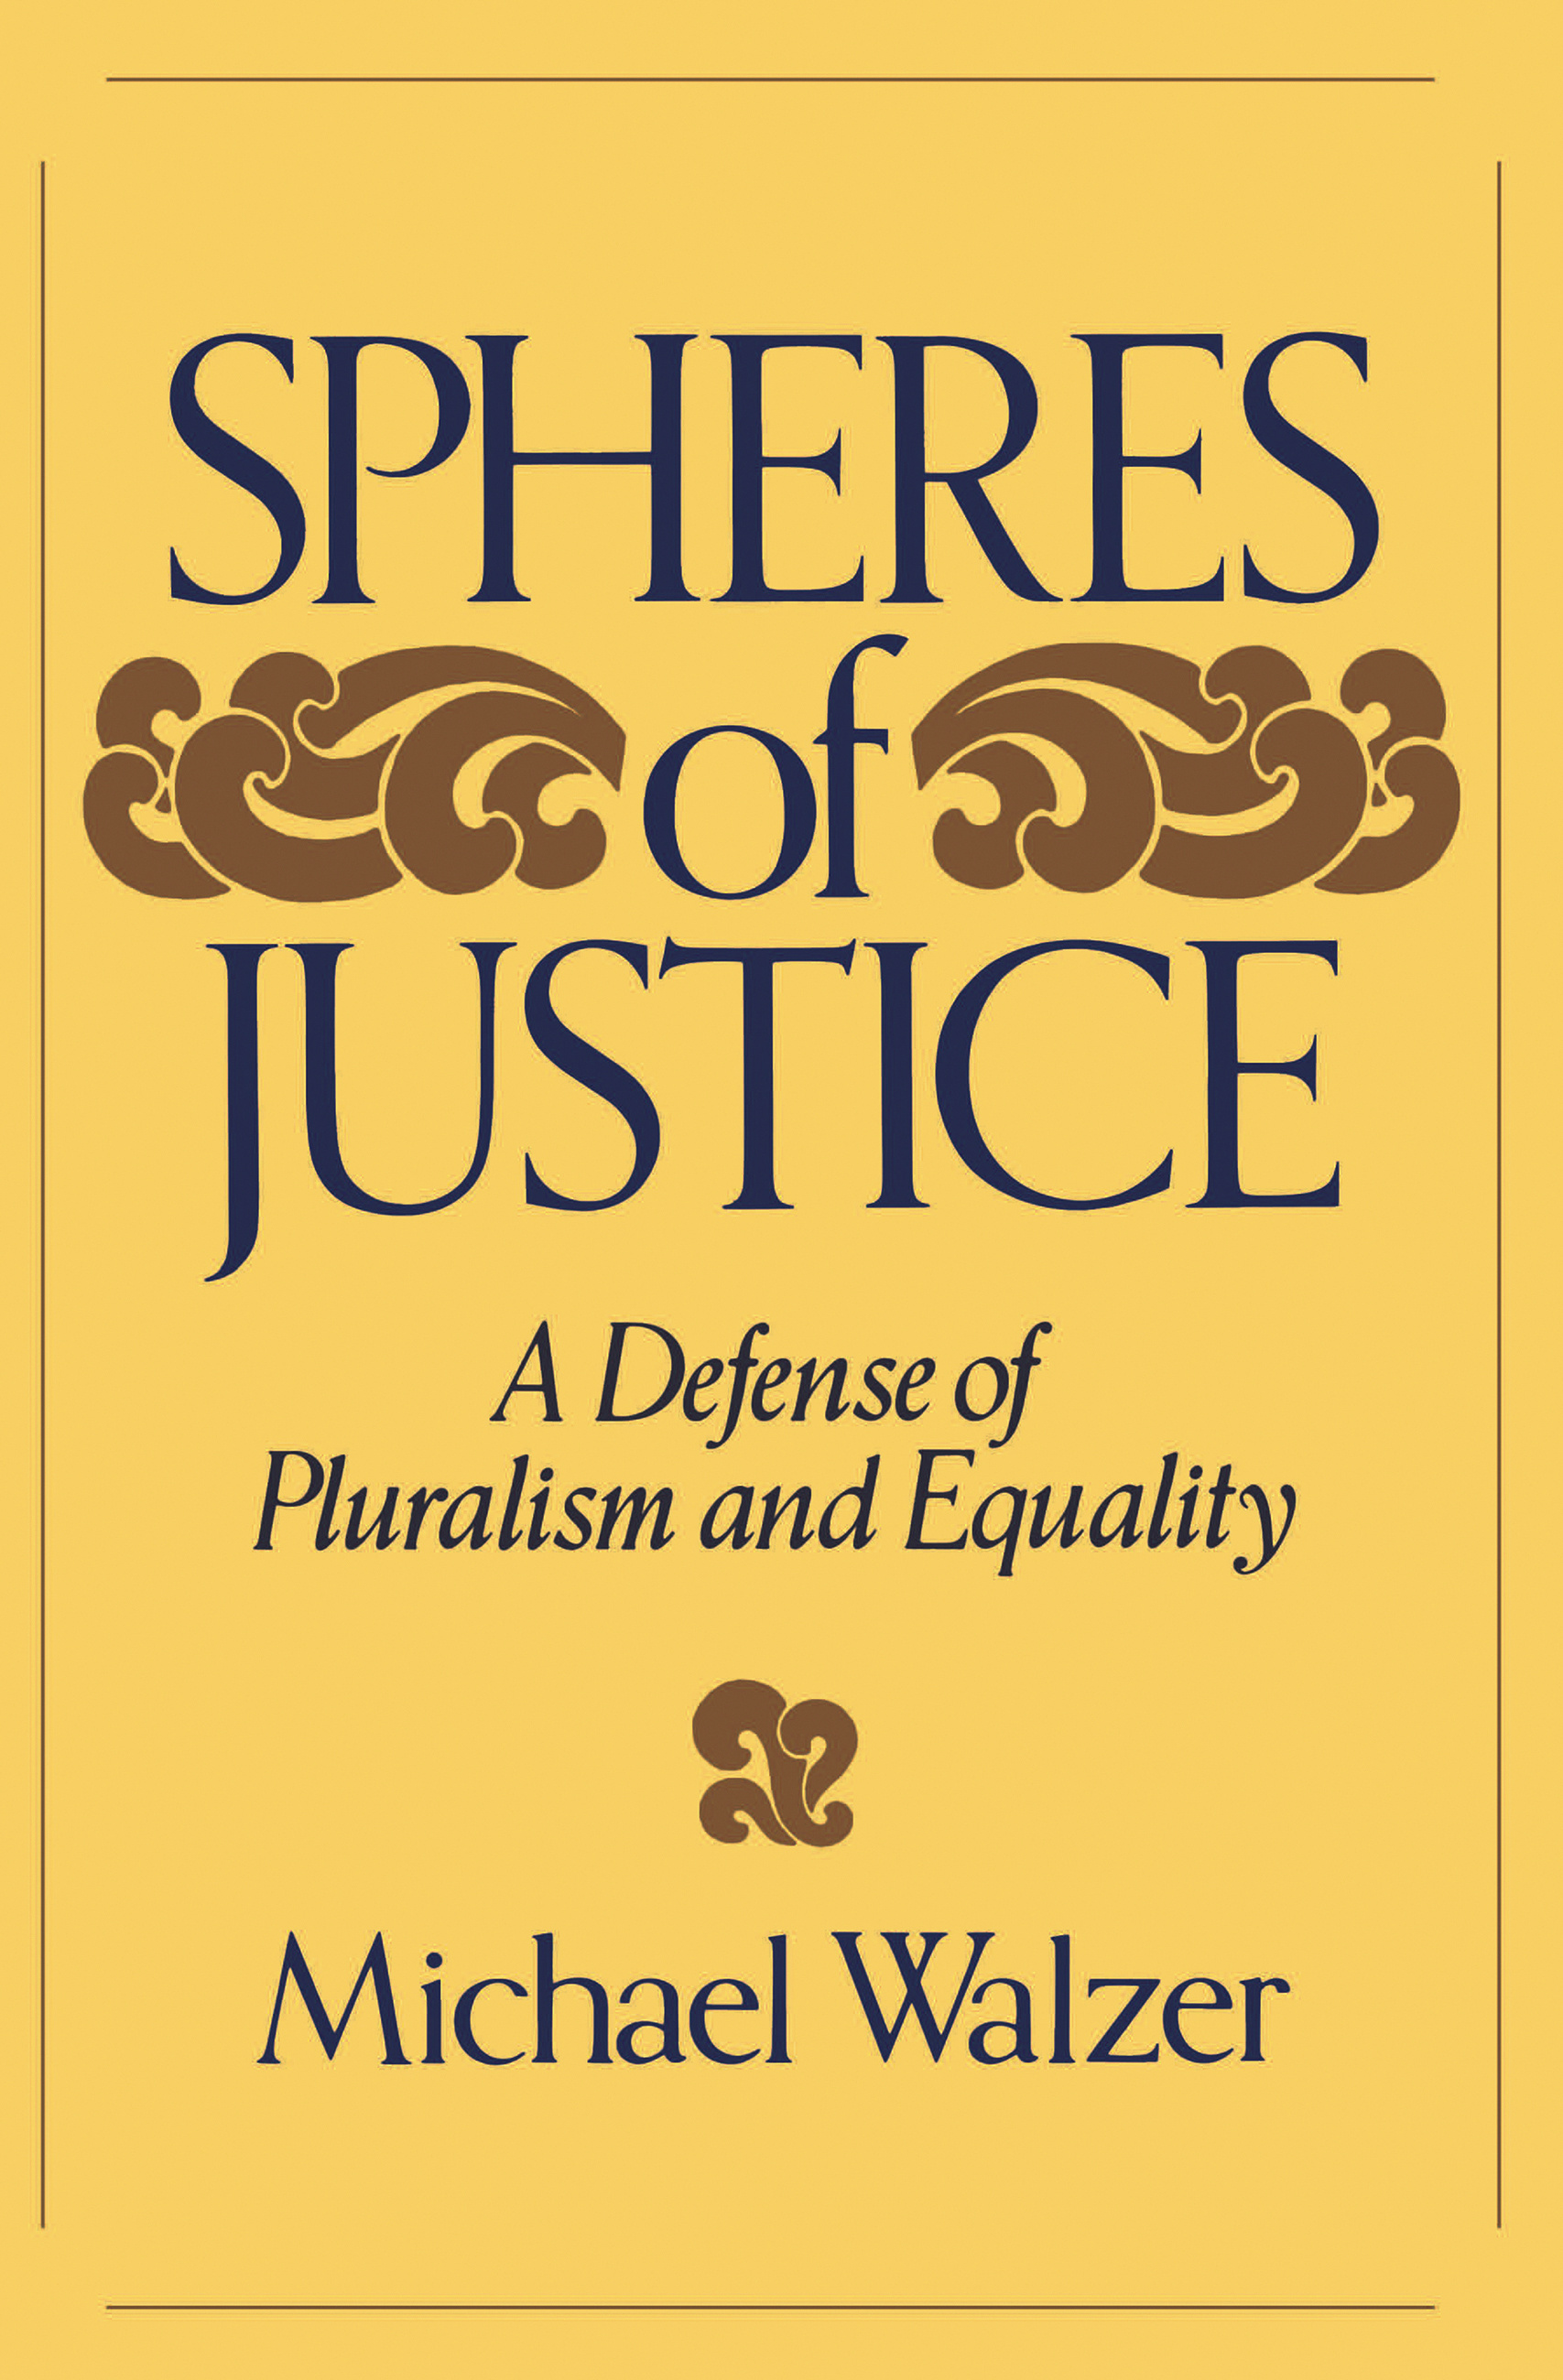 Spheres Of Justice by Michael Walzer | Hachette Book Group